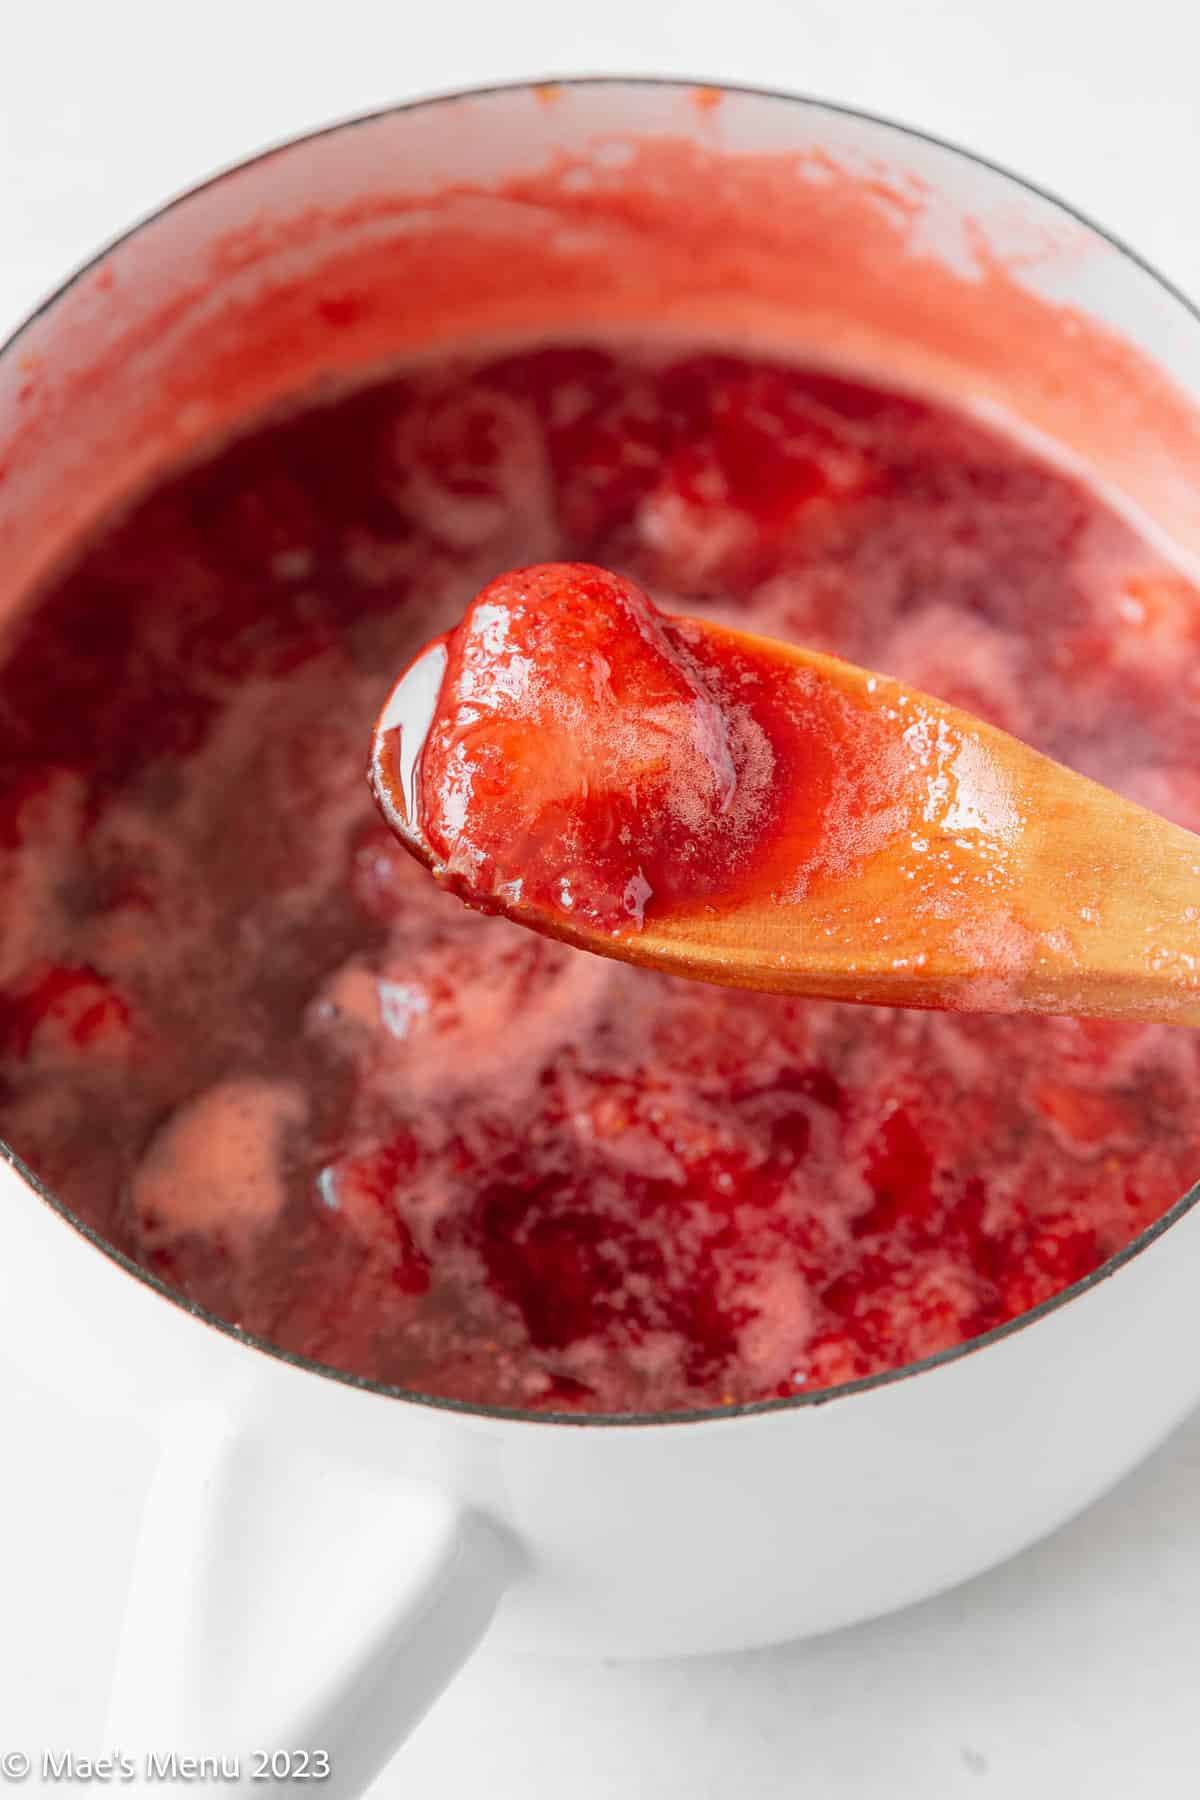 A saucepan of simmered strawberries and lemon juice.